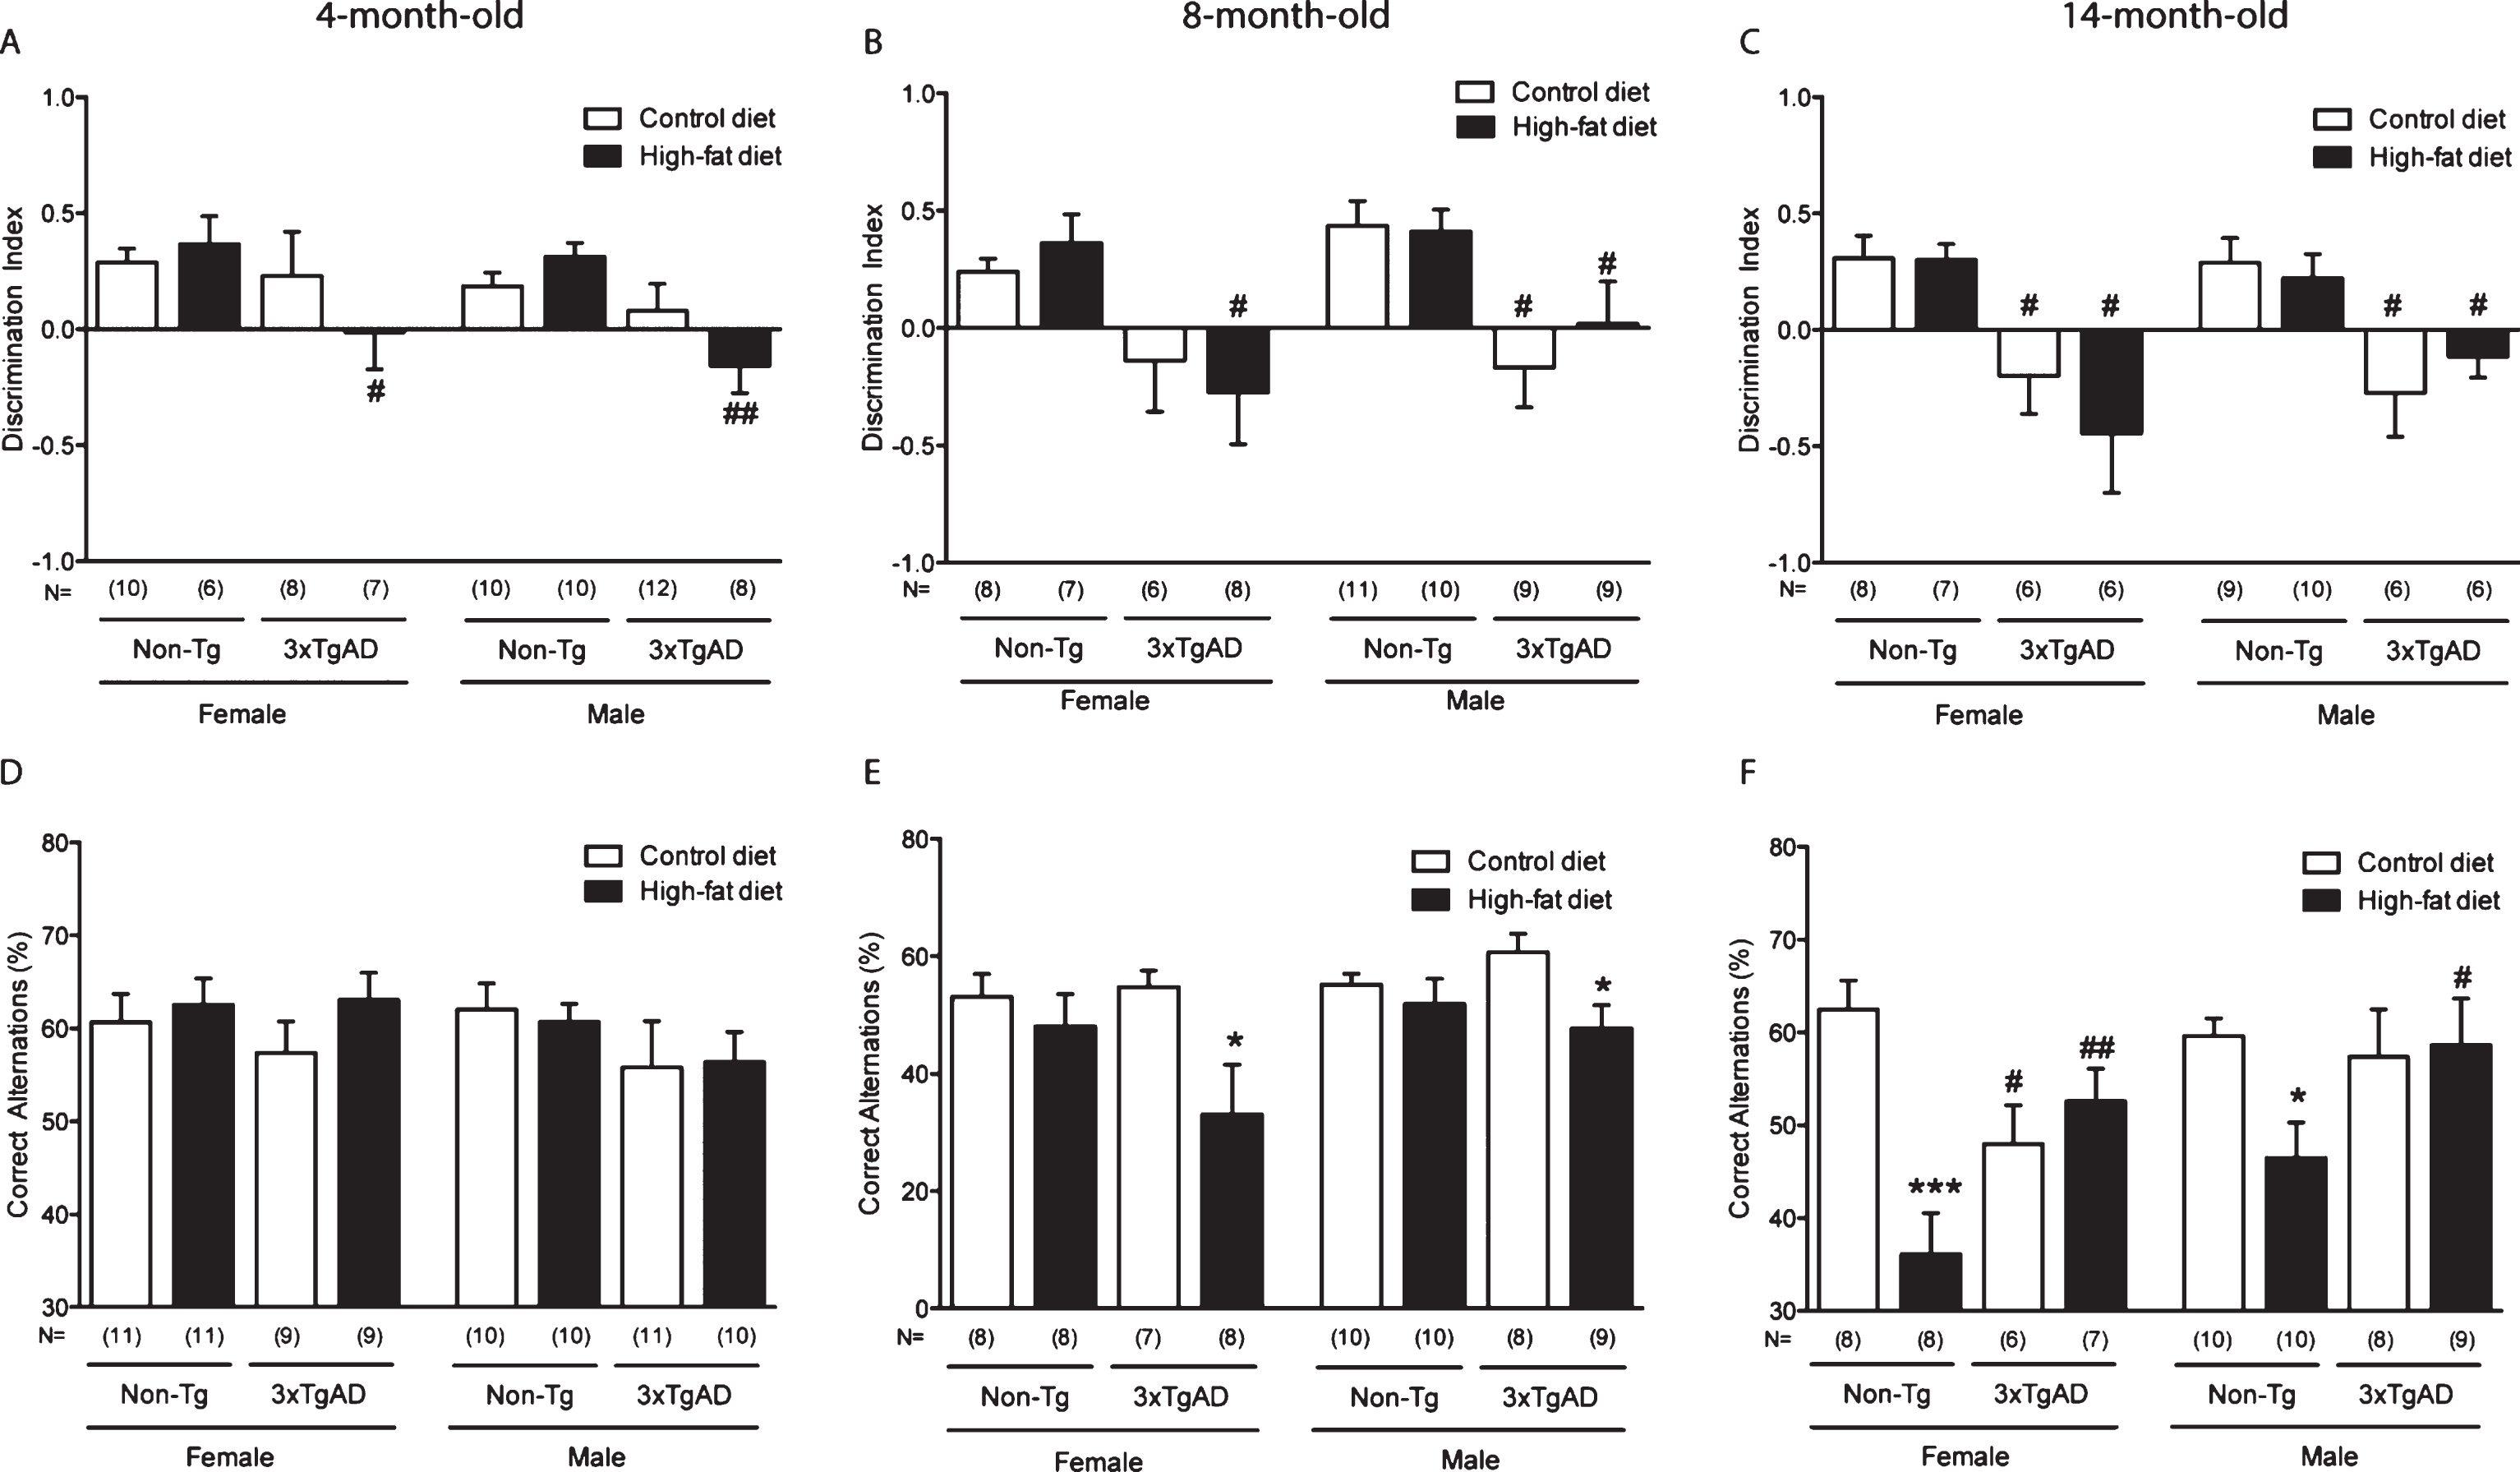 A high-fat diet affects memory in Non-Tg and advances deficits in 3xTgAD mice. Separate groups of male and female Non-Tg control and 3xTgAD mice were maintained on a control or high-fat diet from 2 months of age. Memory was assessed by the novel smell recognition (A-C) and the Y-maze test (D-F) at 4 months of age (A, D), and in a separate group of mice at 8 (B, E) and 14 (C, F) months of age. Data are mean ± SEM, n = 6-12/group. *p < 0.05, ***p < 0.001 for a significant effect of high-fat diet compared to control fed mice of the same sex and genotype. #p < 0.05, # #p < 0.01 for a significant effect of 3xTgAD genotype compared to Non-Tg mice of the same sex and on the same diet. Data are analyzed with 3-way ANOVA followed by Sidak-Holme corrected planned contrasts.